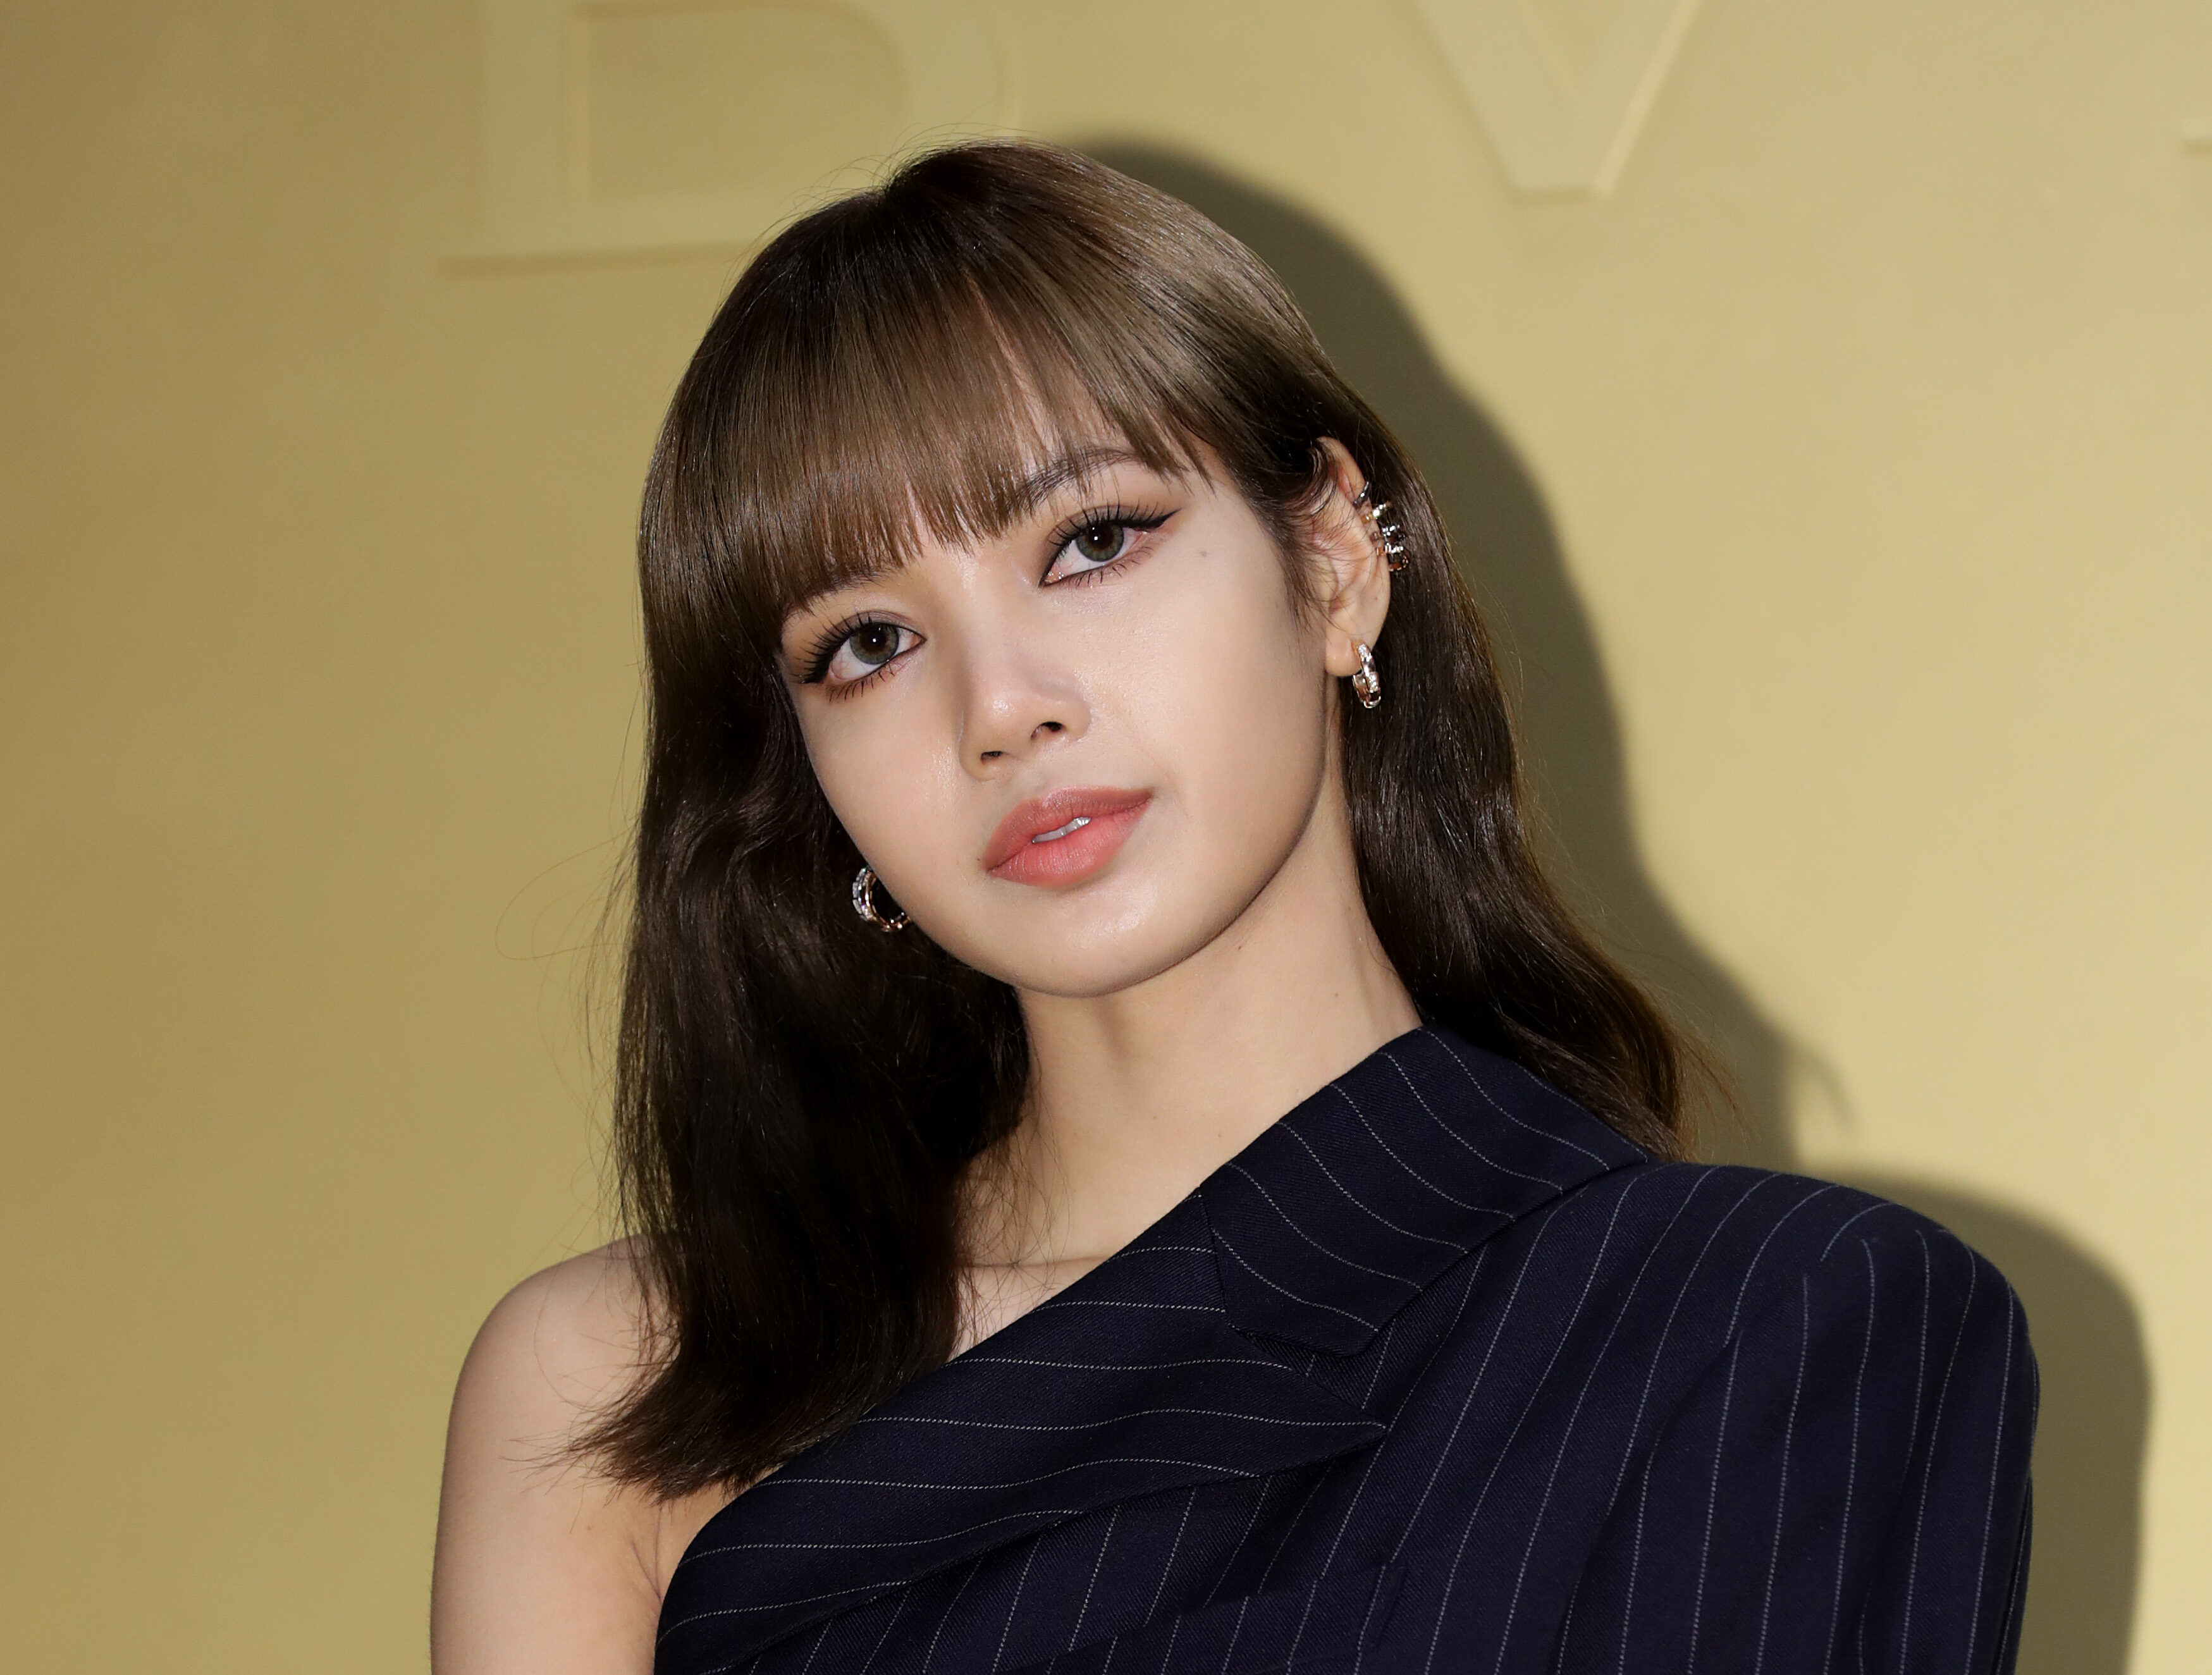 Blackpink's Lisa Becomes First K-Pop Star to Hit No. 1 on 